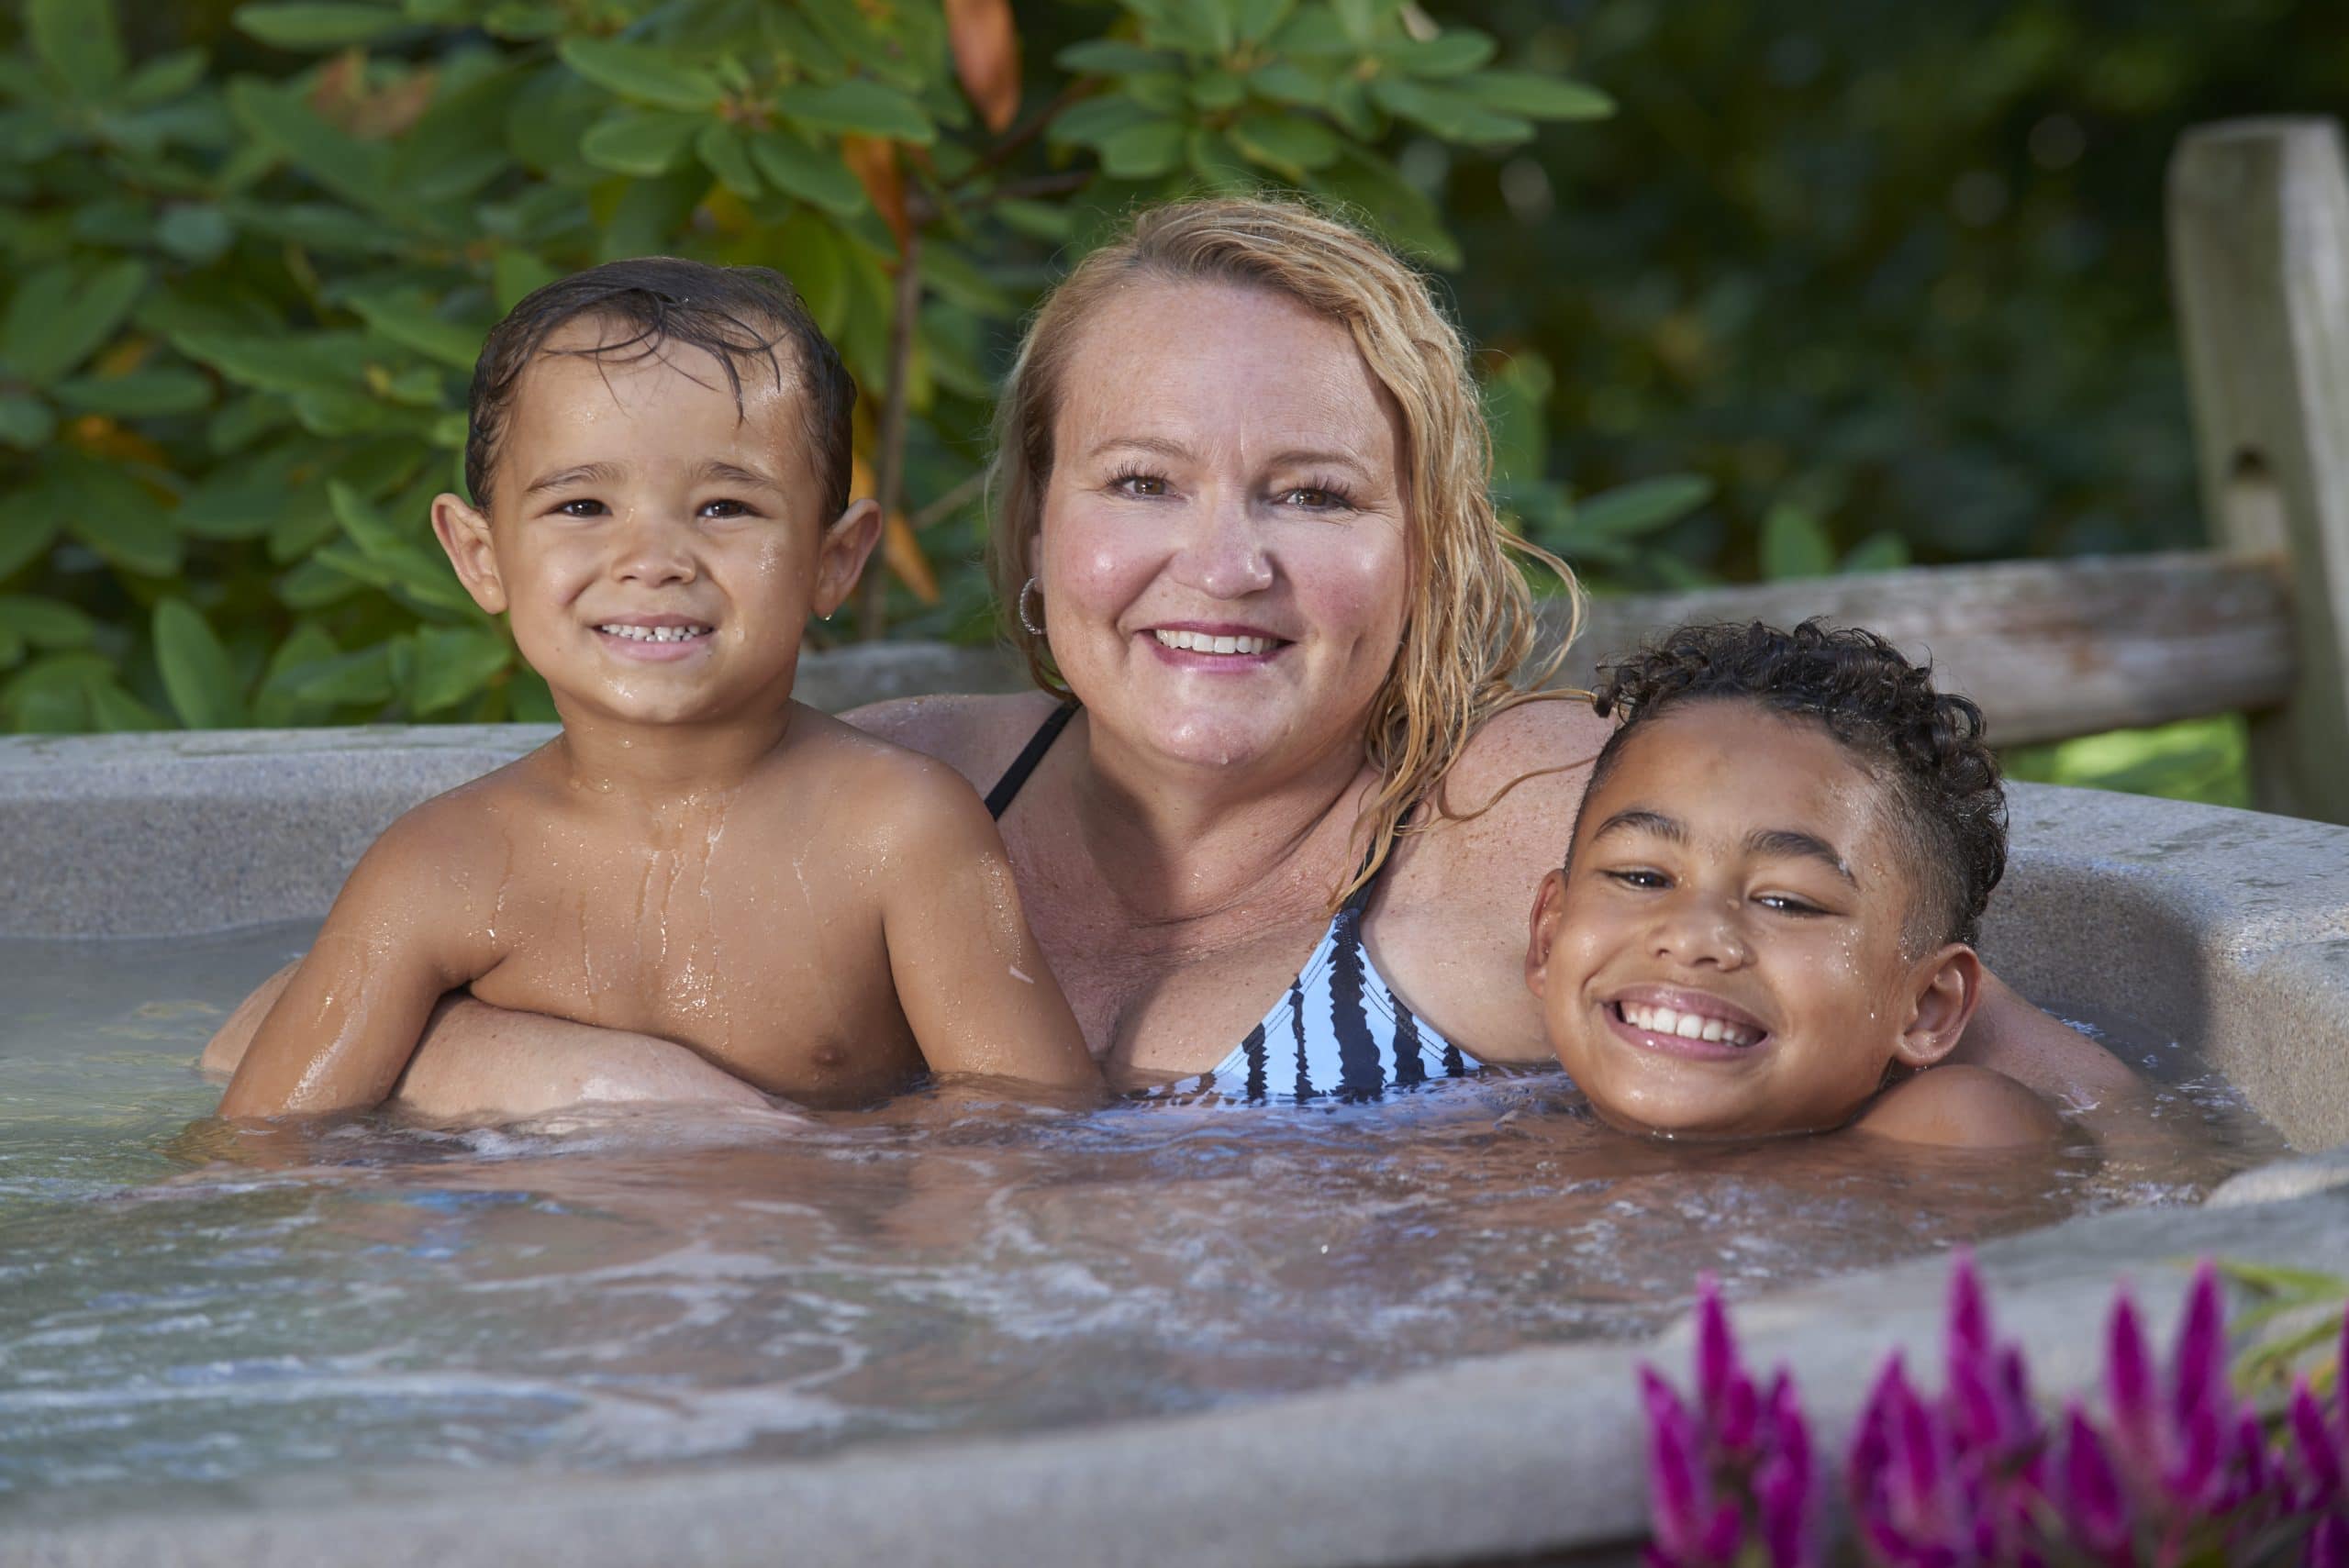 How Do You Keep Your Kids Safe Around Hot Tubs?-DSC_3920